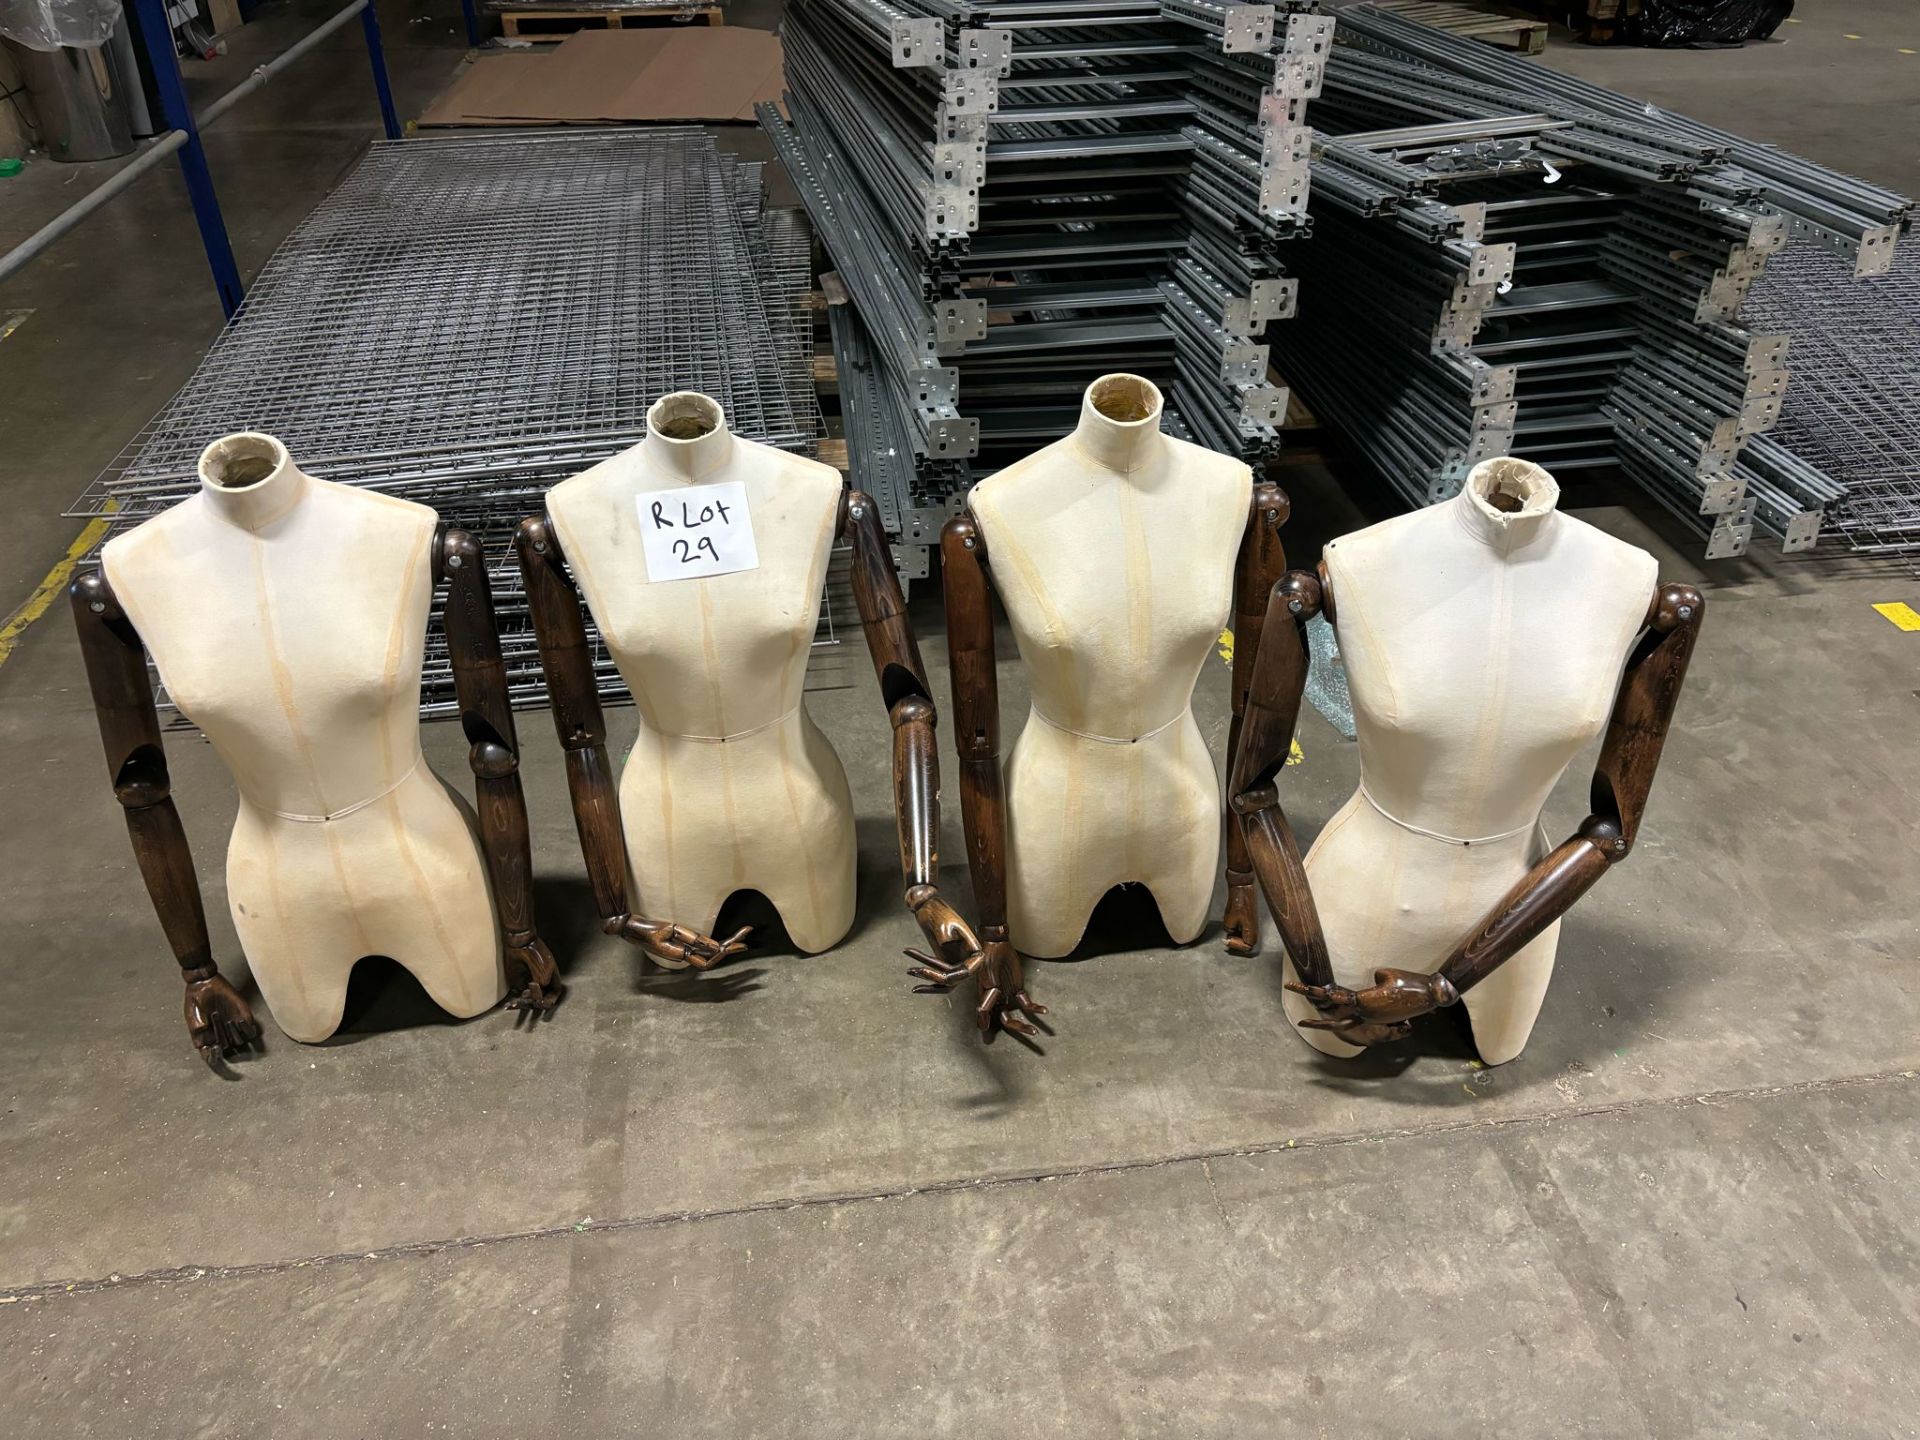 4x ARTICULATED WOODEN TRADITIONAL MANNEQUINS RETAIL SHOP DISPLAY ADULT STANDING TAILORS DUMMIES